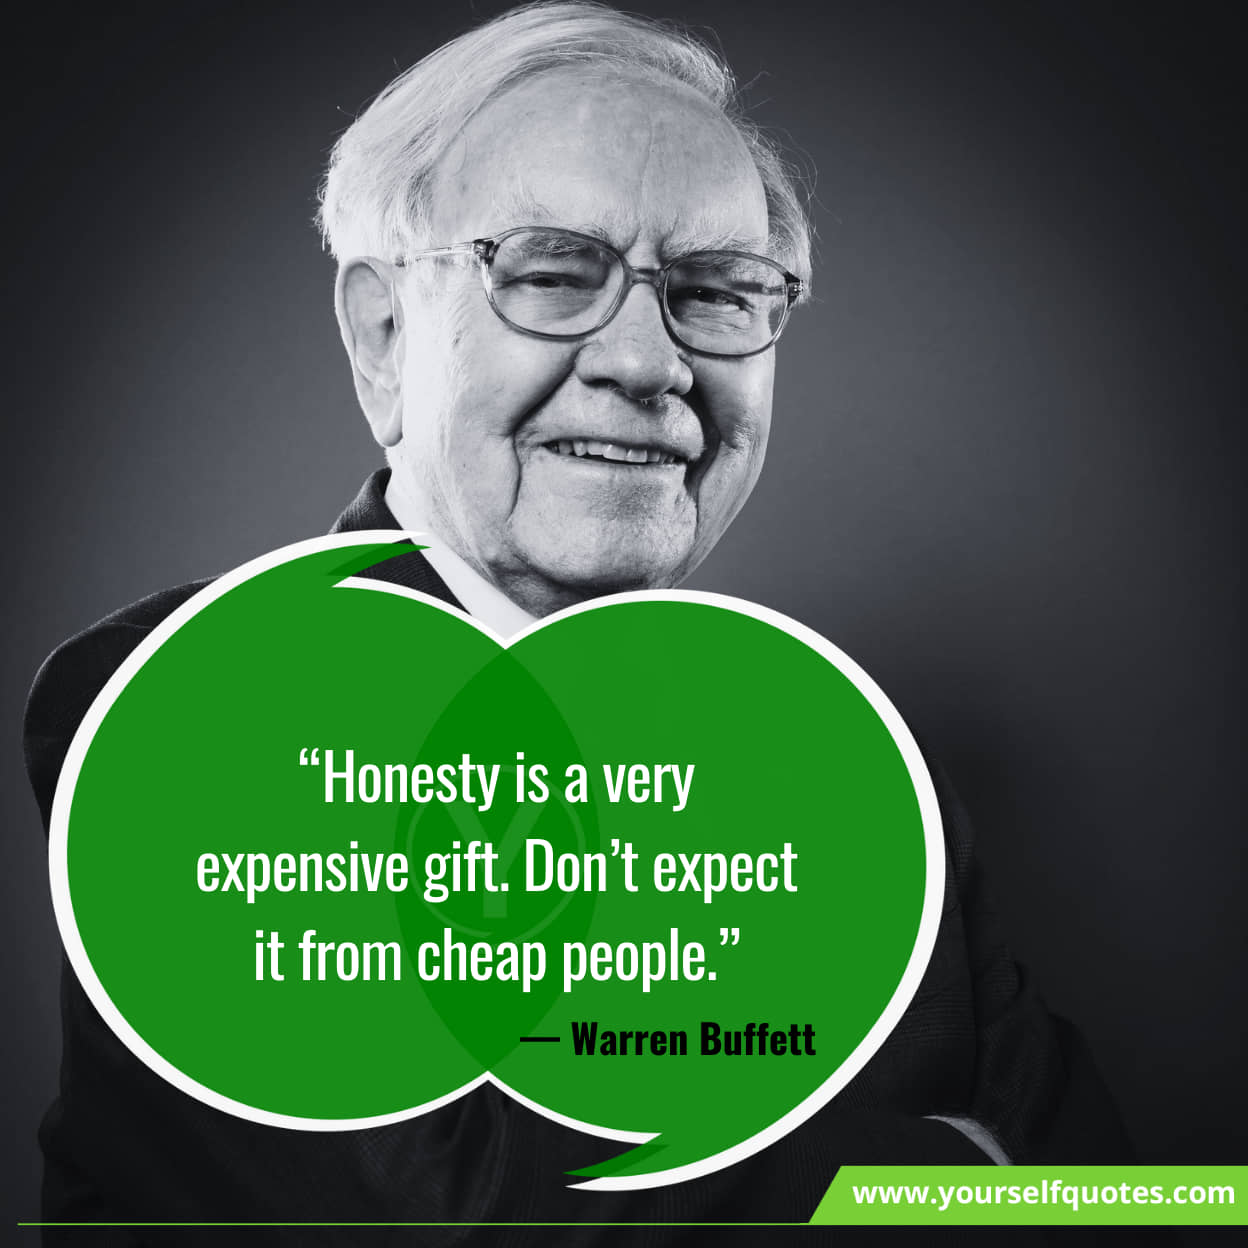 Latest Best Famous Quotes On Honesty